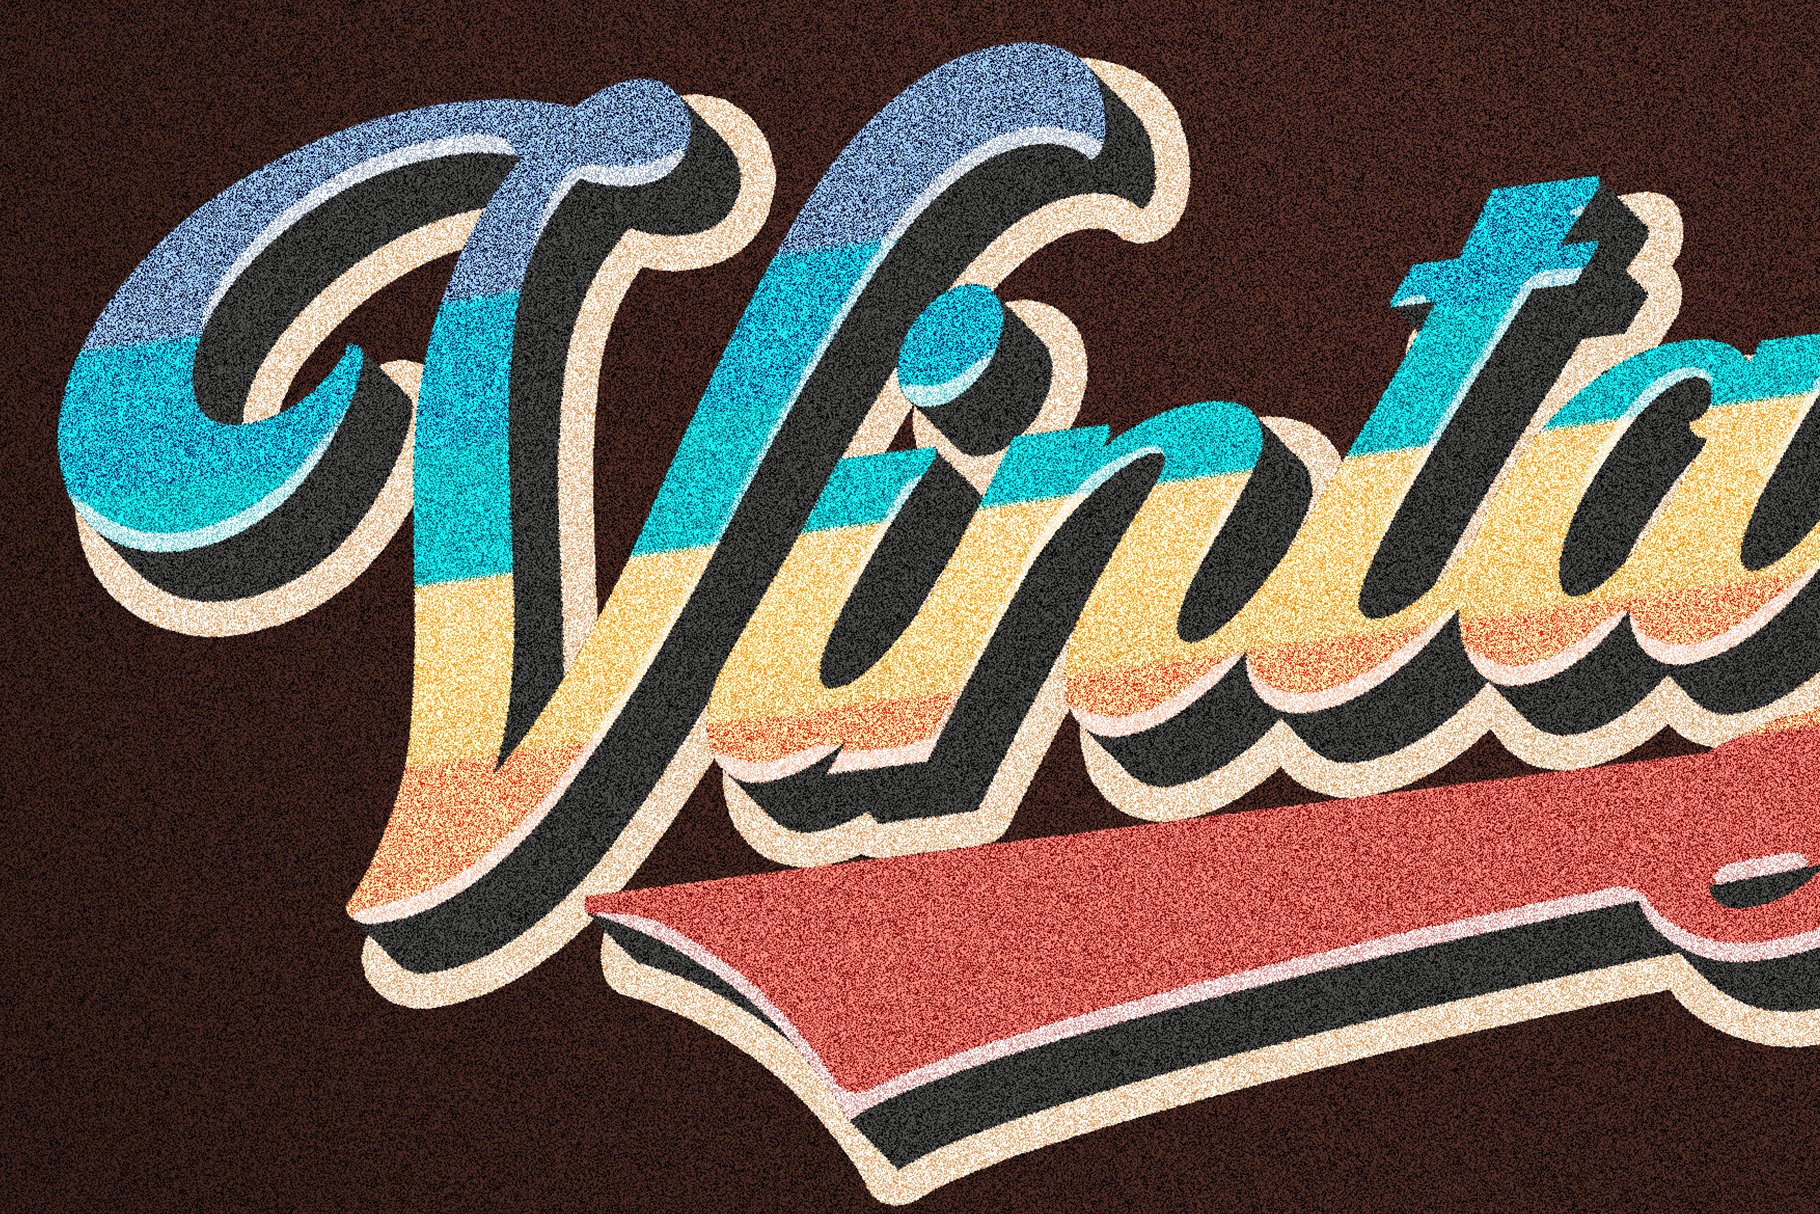 Vintage Text Effect Stylepreview image.